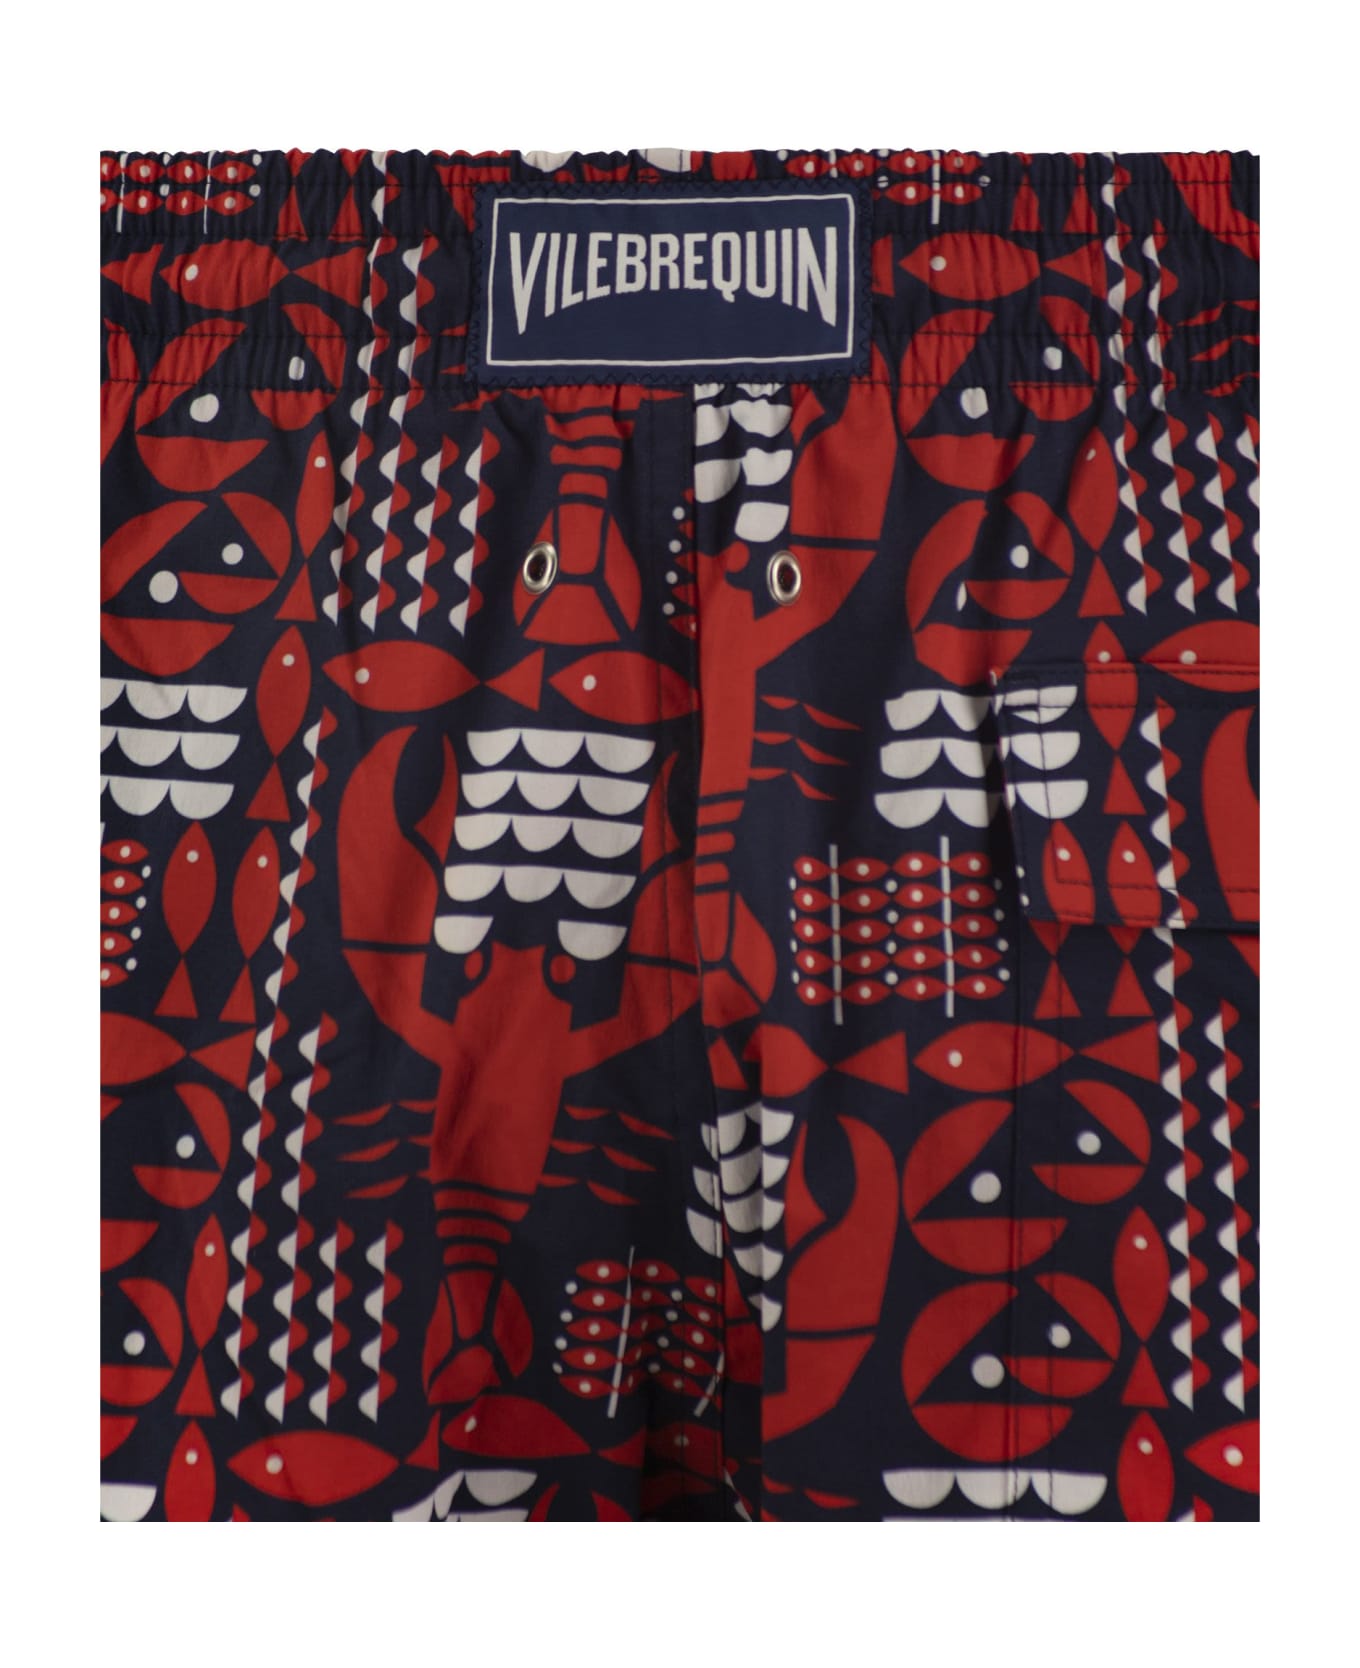 Vilebrequin Stretch Beach Shorts With Patterned Print - Marine Blue